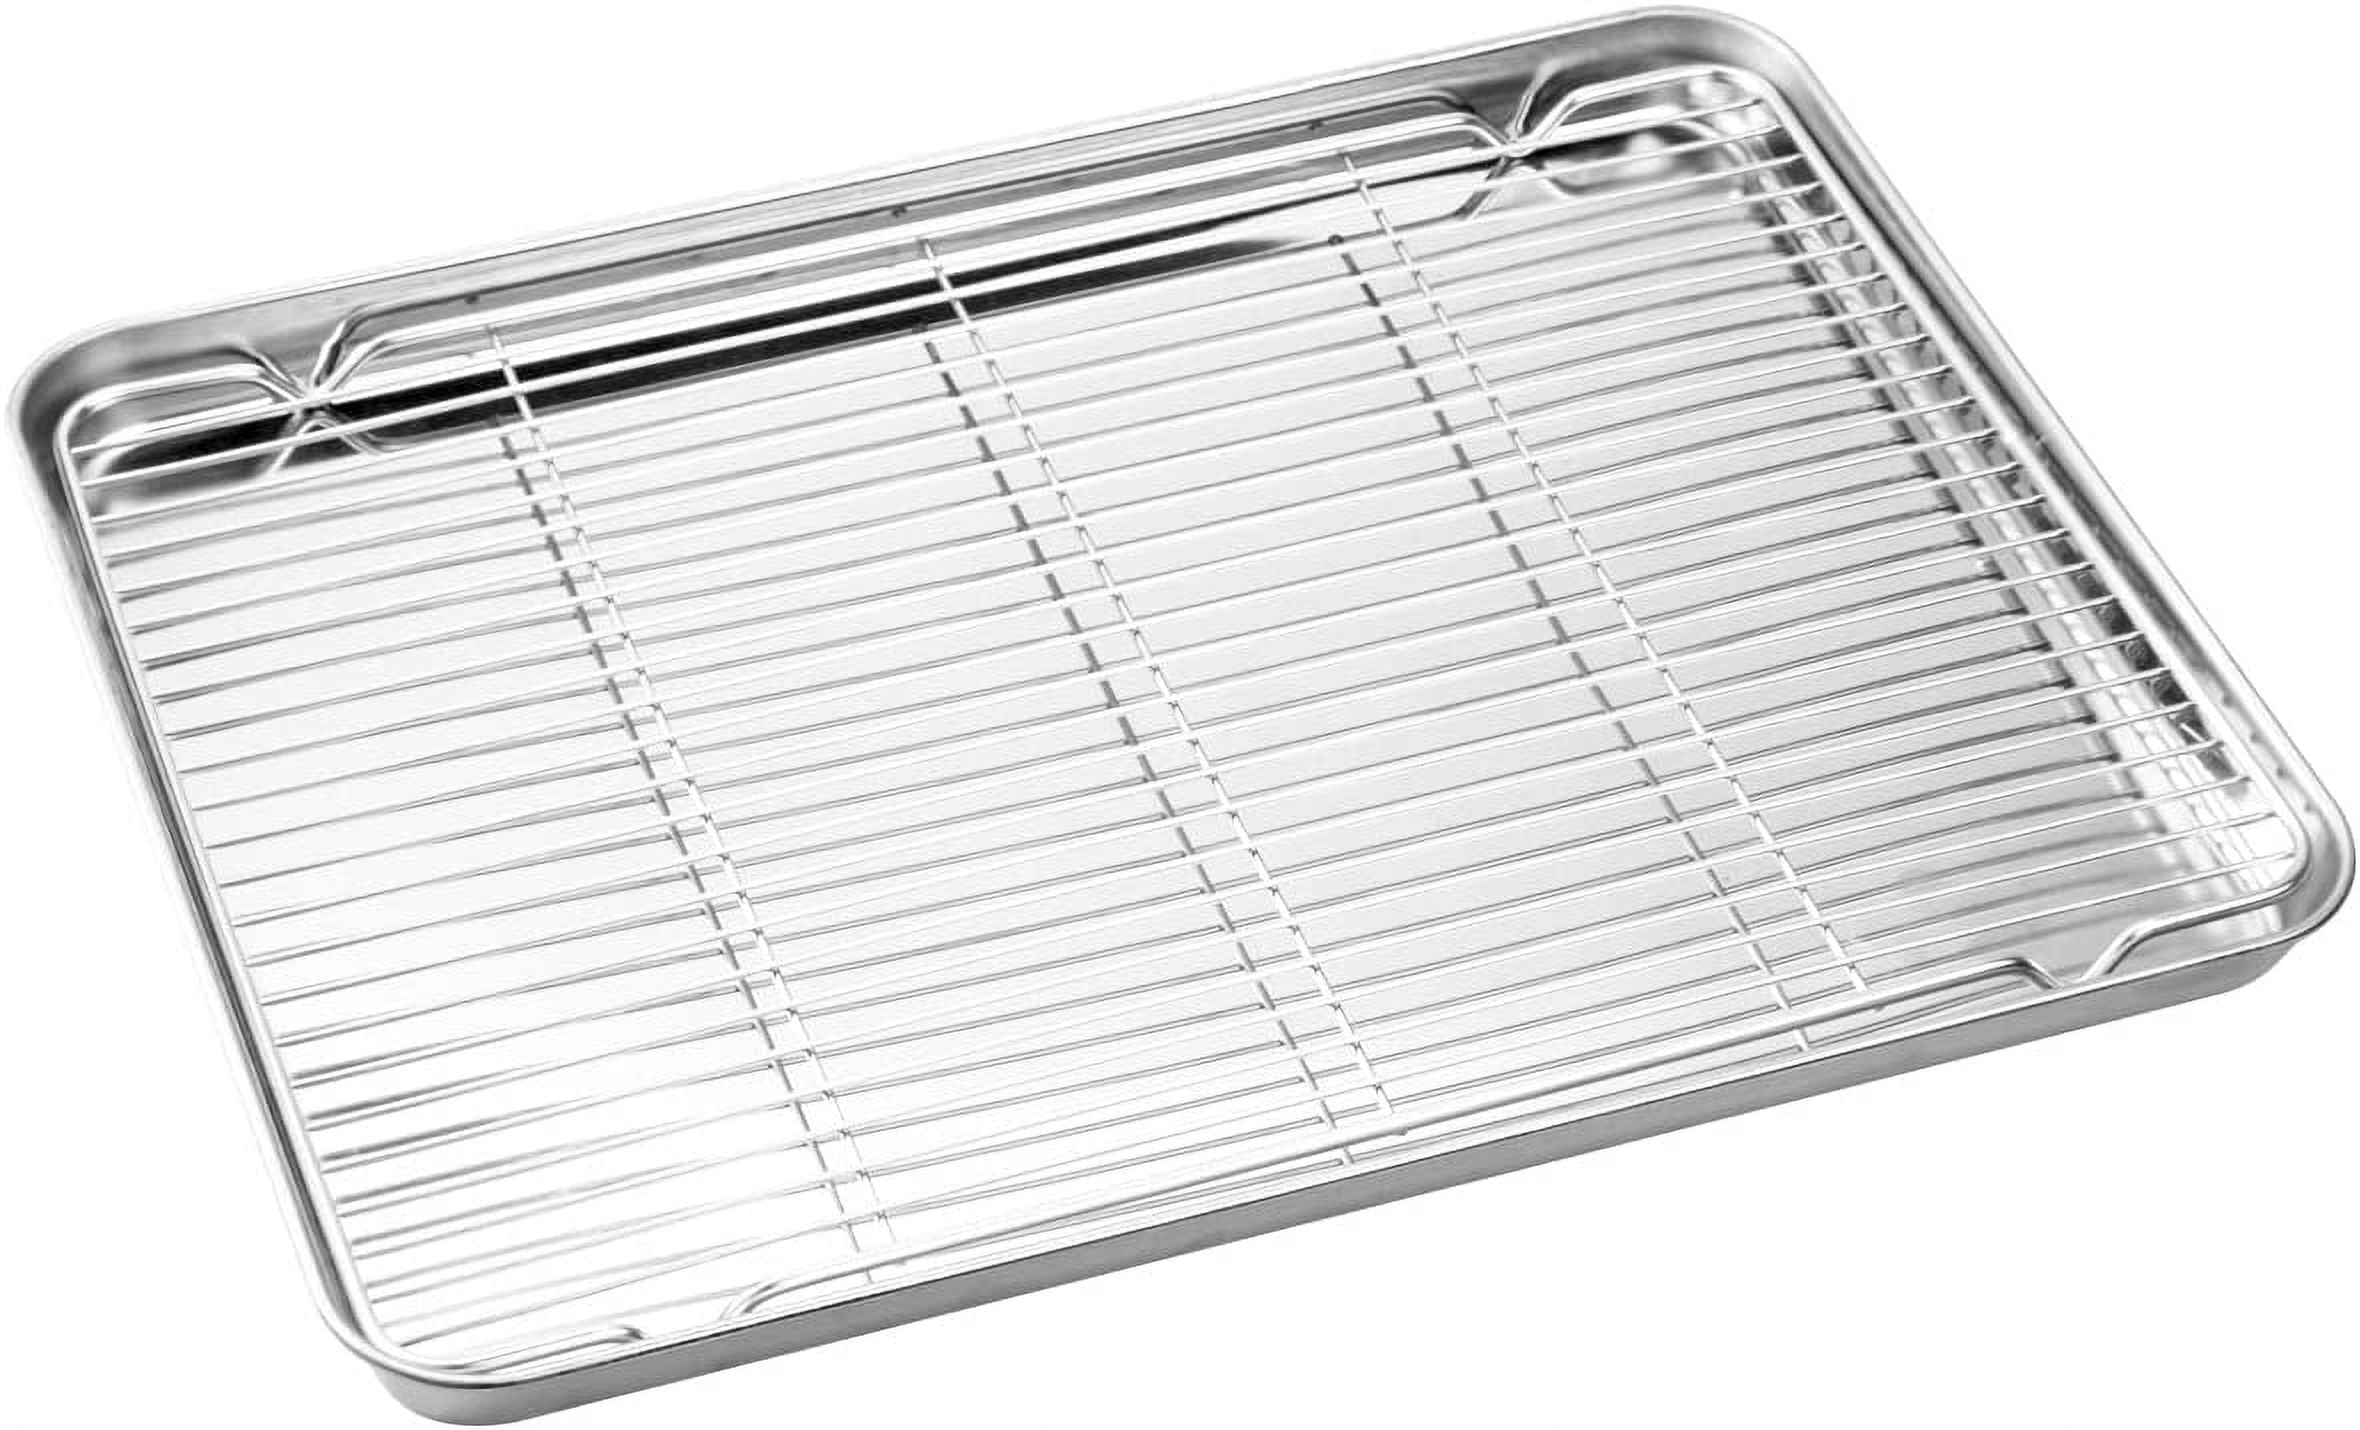 WEZVIX Stainless Steel Baking Sheet with Cooling Rack Set of 2 Cookie Sheet  with Wire Rack Rectangle Size 10 x 8 x 1 inch, Non Toxic, Rust Free & Less